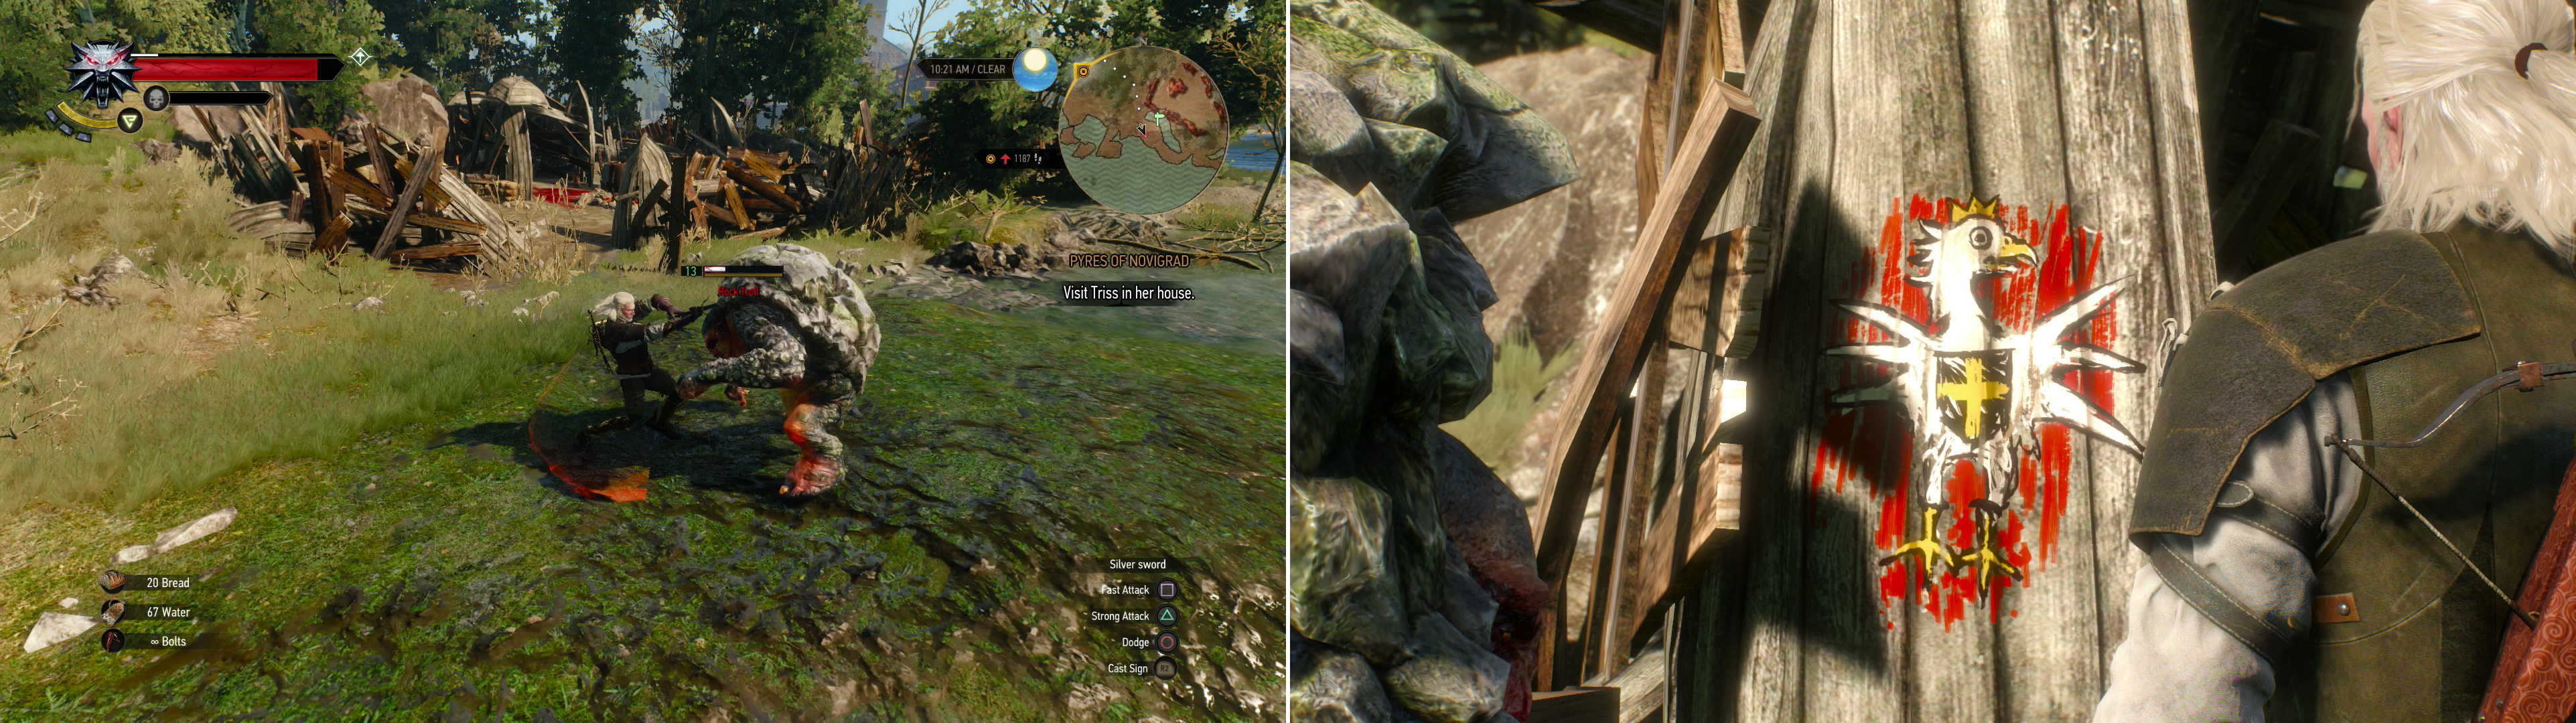 Either kill the Troll at White Eagle Fort (left) or help it set the camp to correct military order (right). Just… don't let Geralt paint if you don't want to torture art.